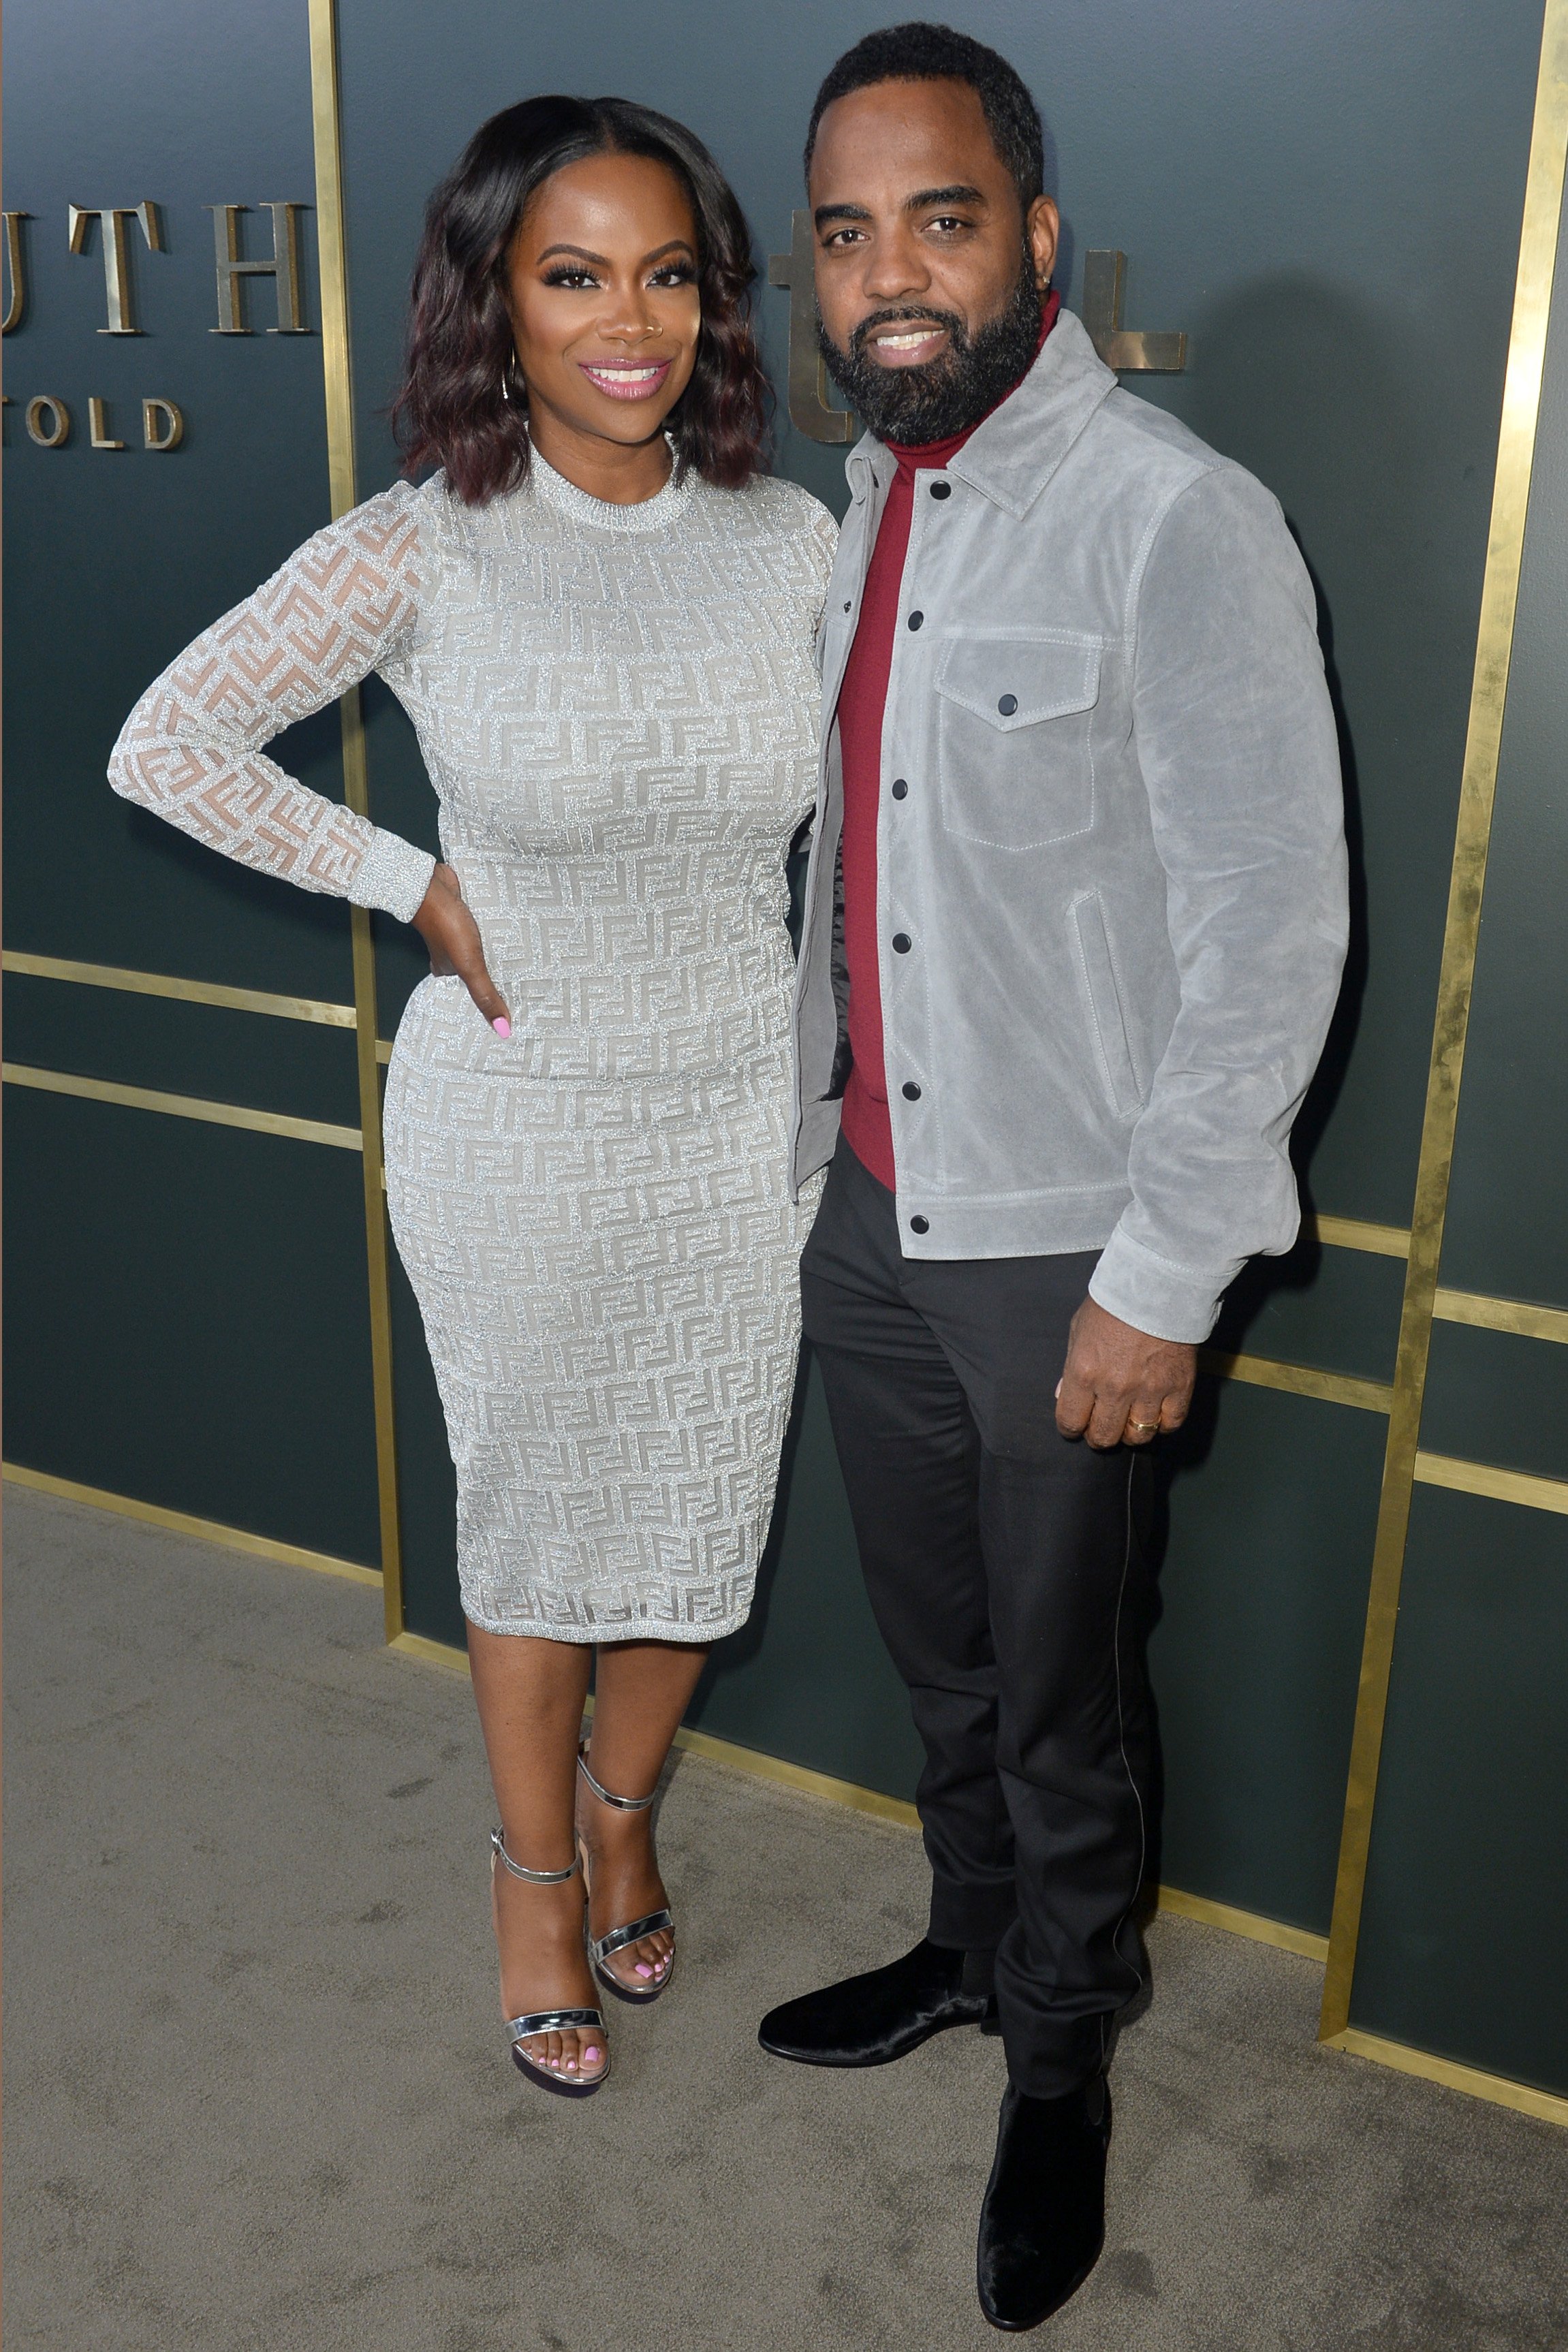 Kandi Burruss & Todd Tucker at the premiere of Apple TV+'s 'Truth Be Told' on Nov. 11, 2019 in California | Photo: Getty Images